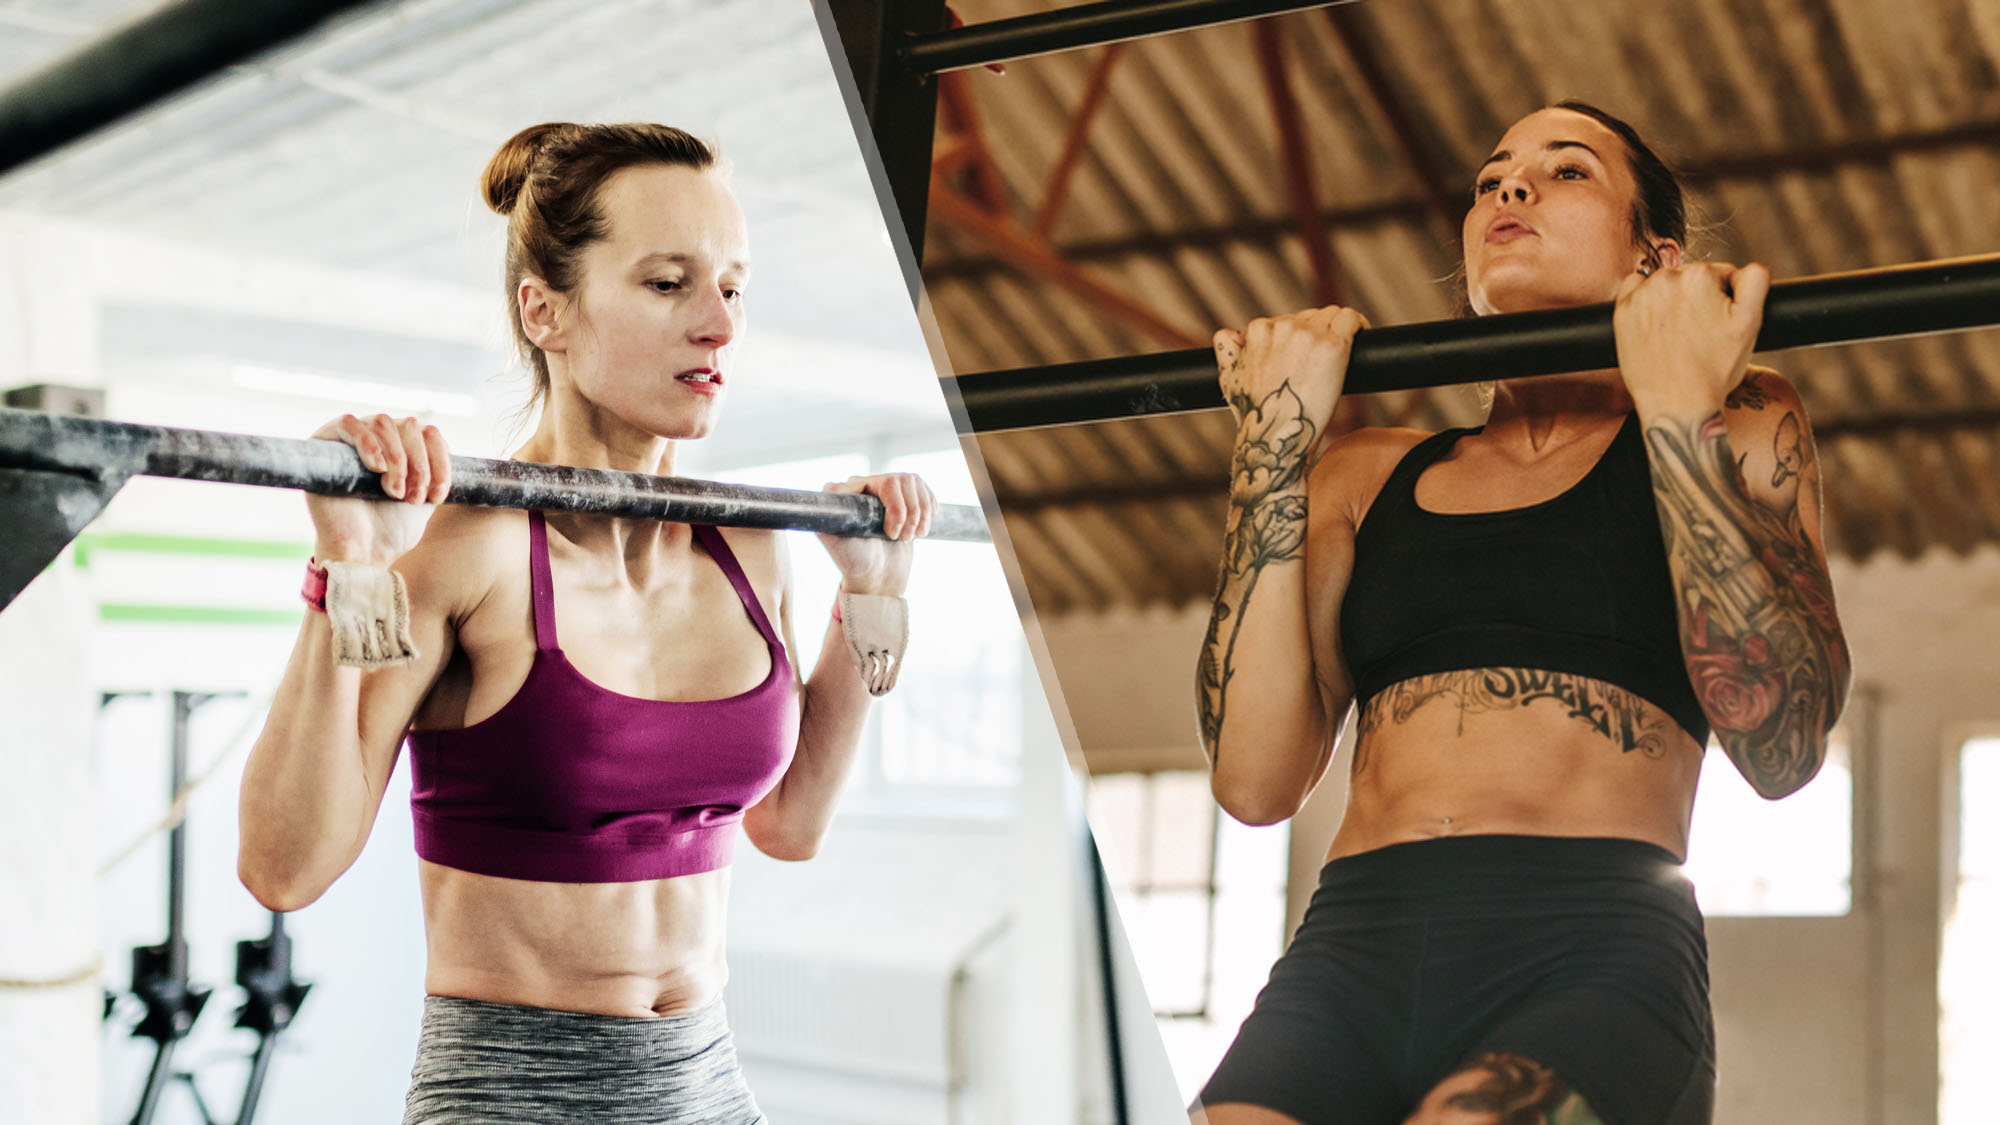 Pull-ups vs chin-ups: Which is better for building strength